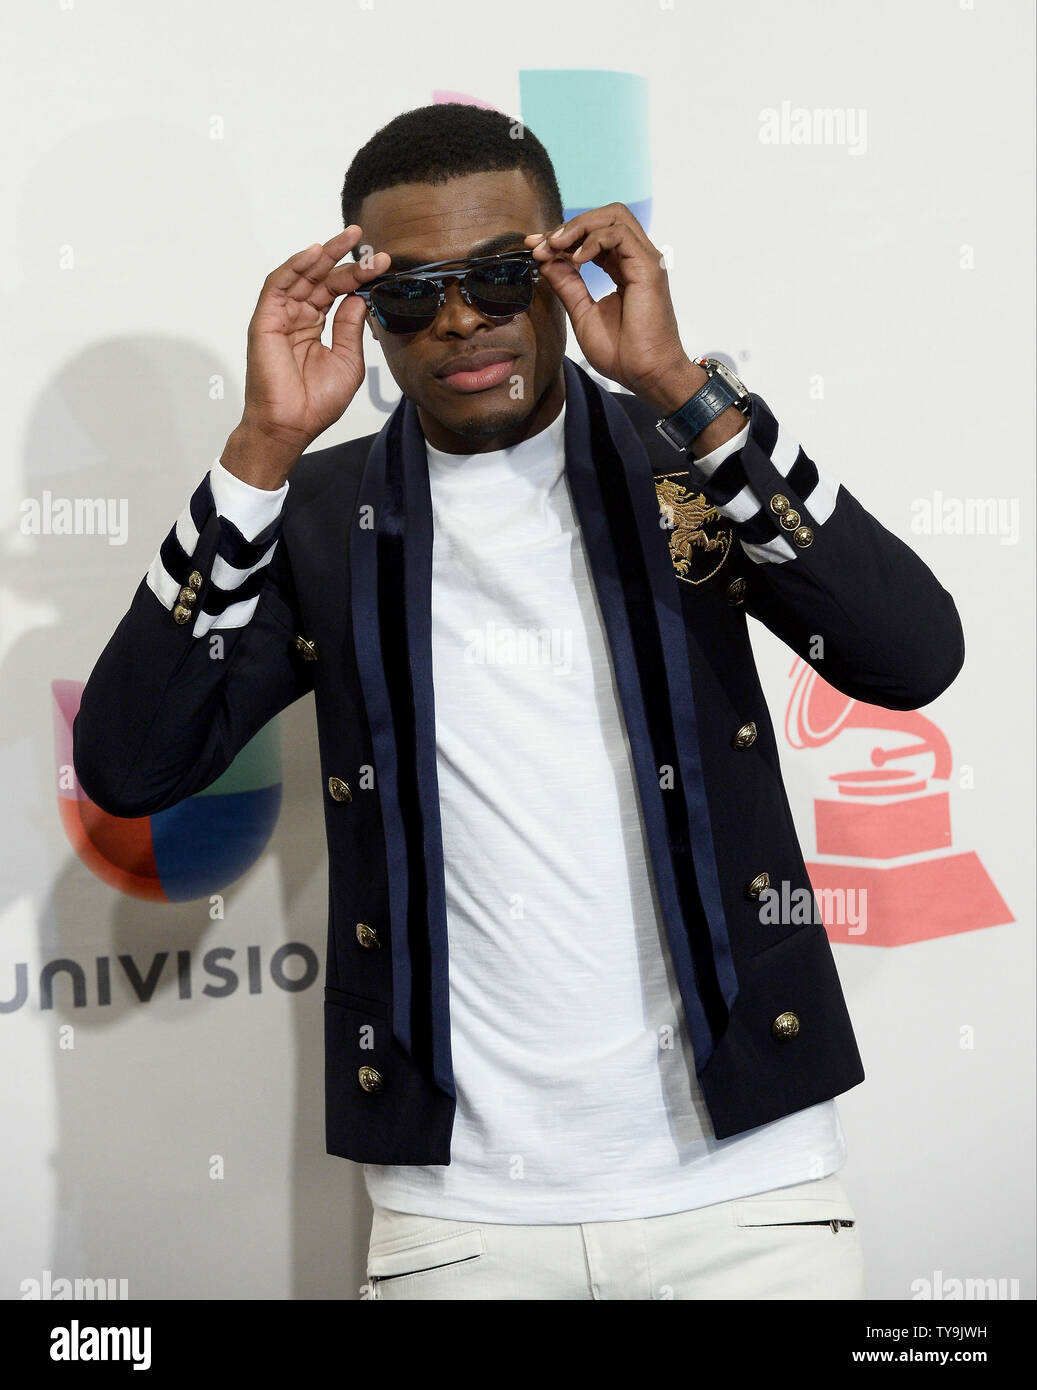 Omi poses backstage during the 16th Annual Latin Grammy Awards at the MGM Grand Garden Arena in Las Vegas, Nevada on November 19, 2015.   Photo by Jim Ruymen/UPI Stock Photo